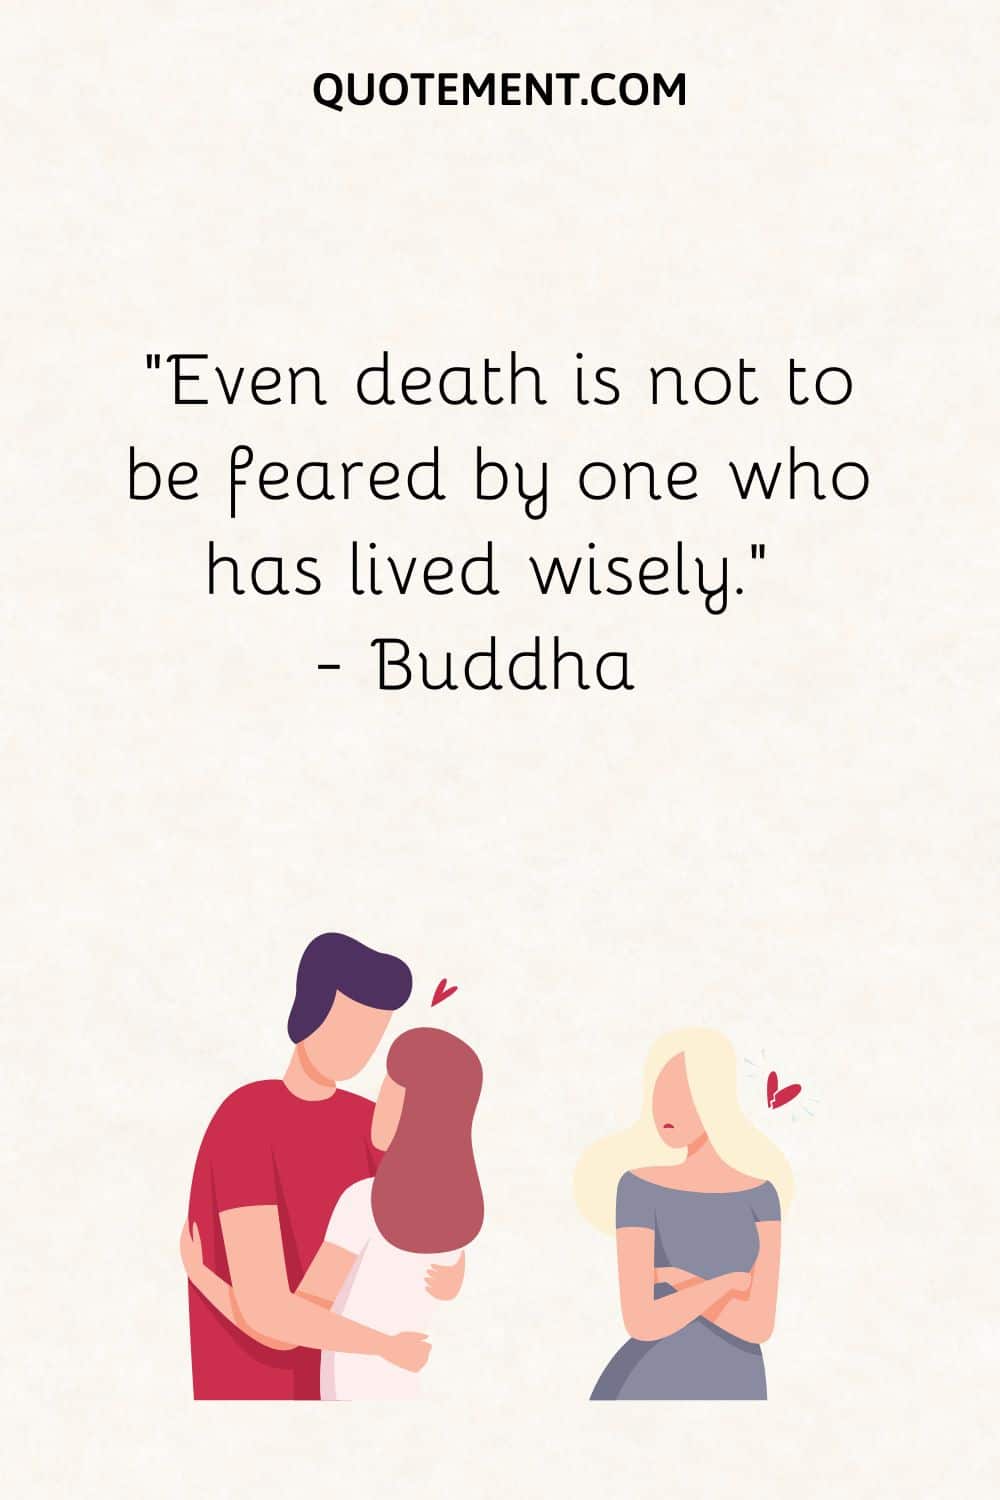 Even death is not to be feared by one who has lived wisely